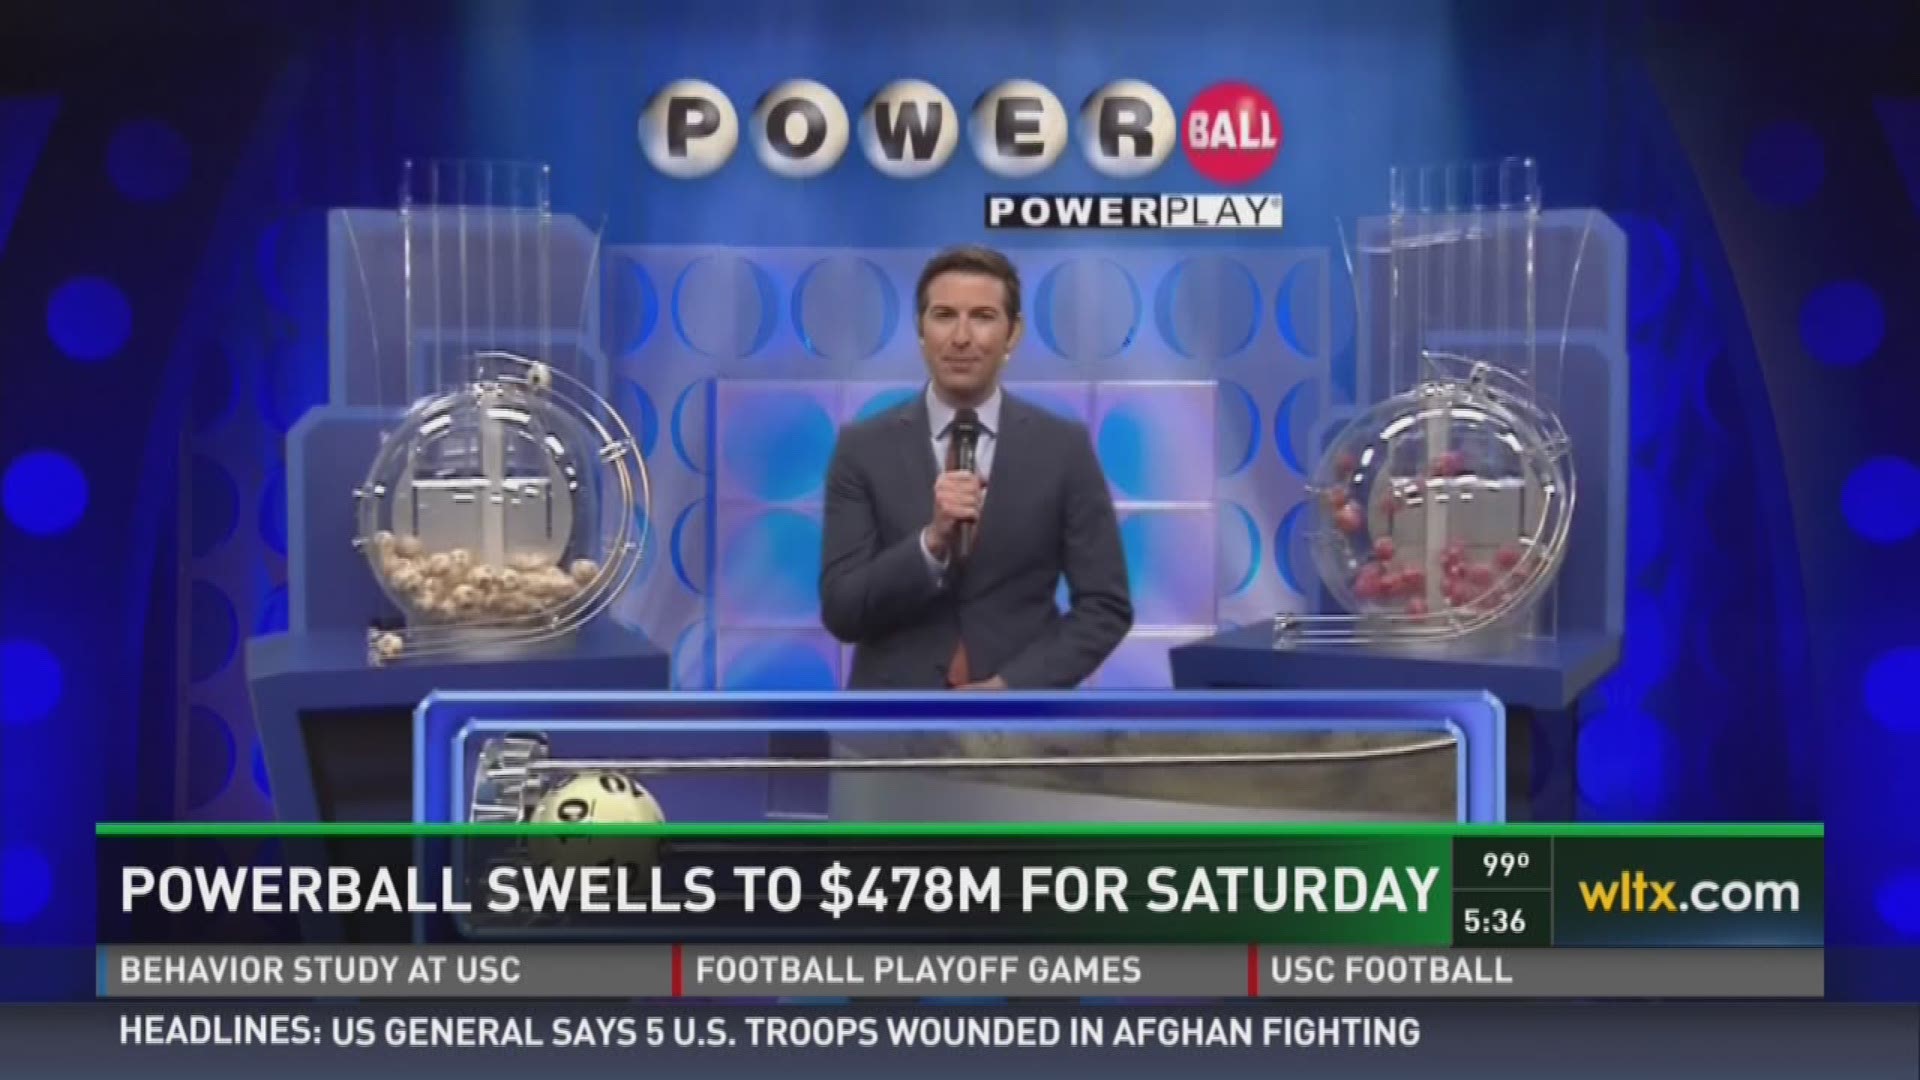 The fifth largest Powerball drawing will be held on Saturday.  Jackpot is at $478M